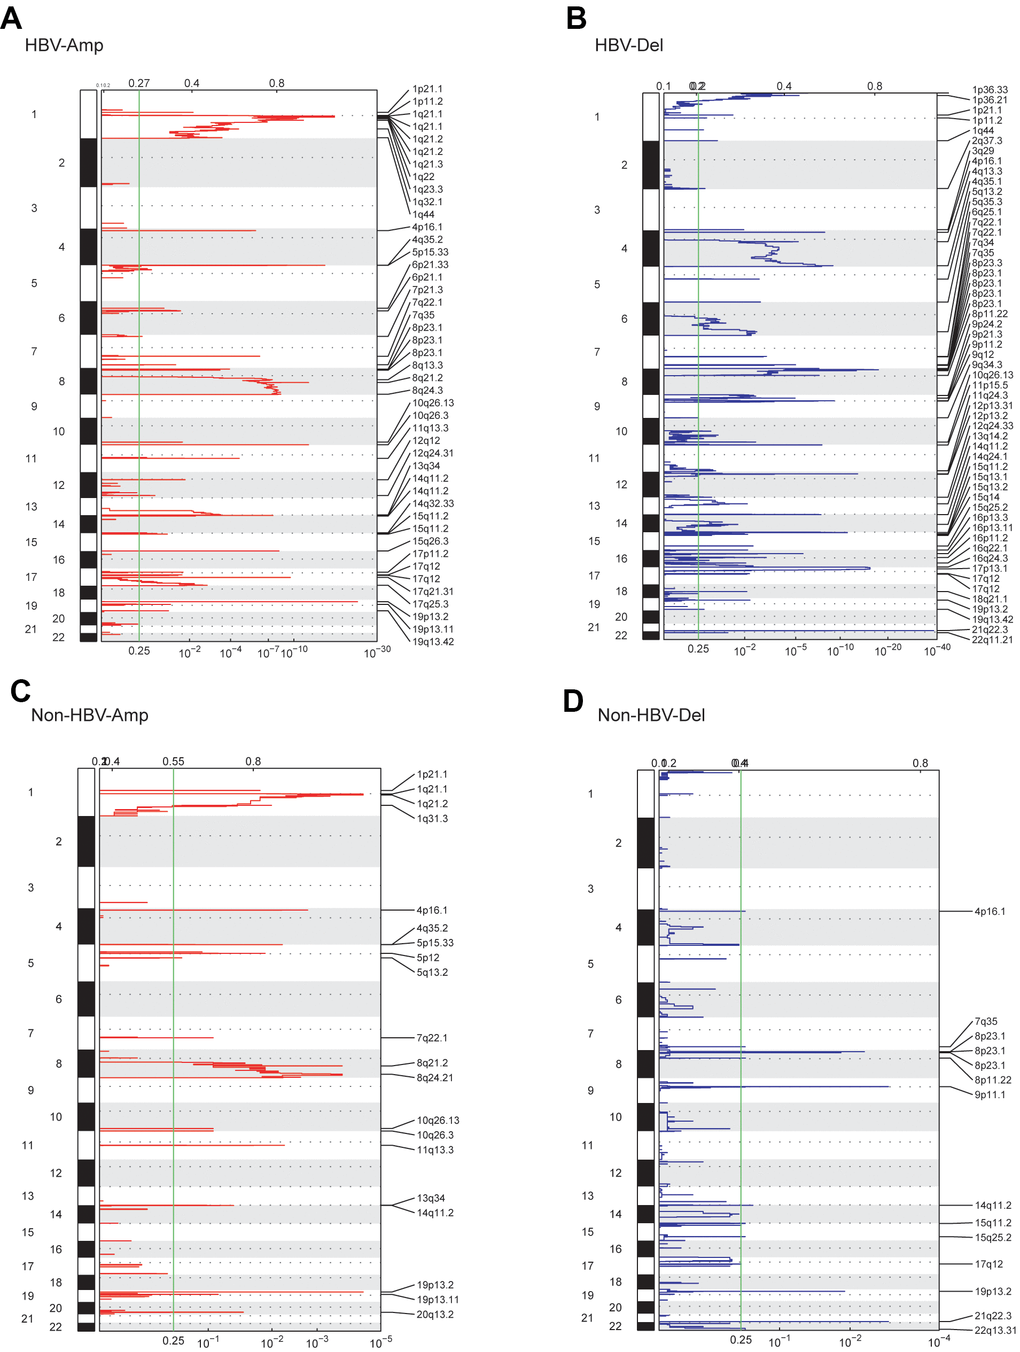 GISTIC analysis showed the whole-genome distribution of copy number alterations. (A) CNV amplifications in the WCH-HBV-HCC group. (B) CNV deletions in the WCH-HBV-HCC group. (C) CNV amplifications in the WCH-NonHBV-HCC group. (D) CNV deletions in the WCH-NonHBV-HCC group. GISTIC q-values (x-axis) for deletions (B, D) and amplifications (A, C) are plotted across the genome (y-axis). The green vertical line is where the q-value is 0.25.